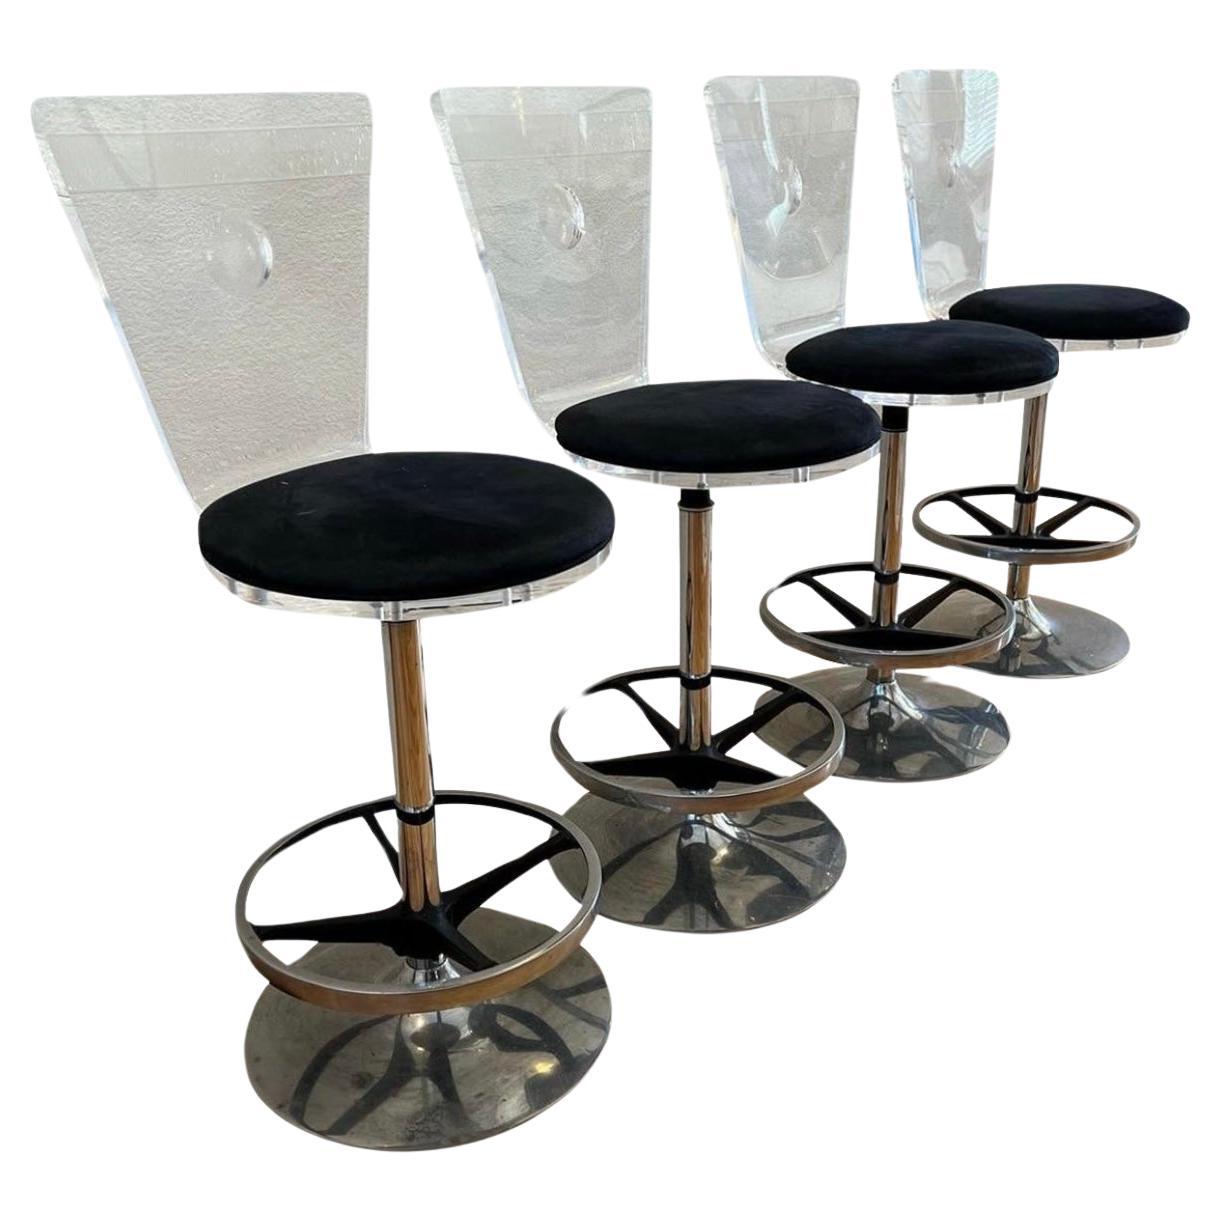 1980s Vintage Lucite and Chrome Swivel Counter Stools, Set of 4 chairs